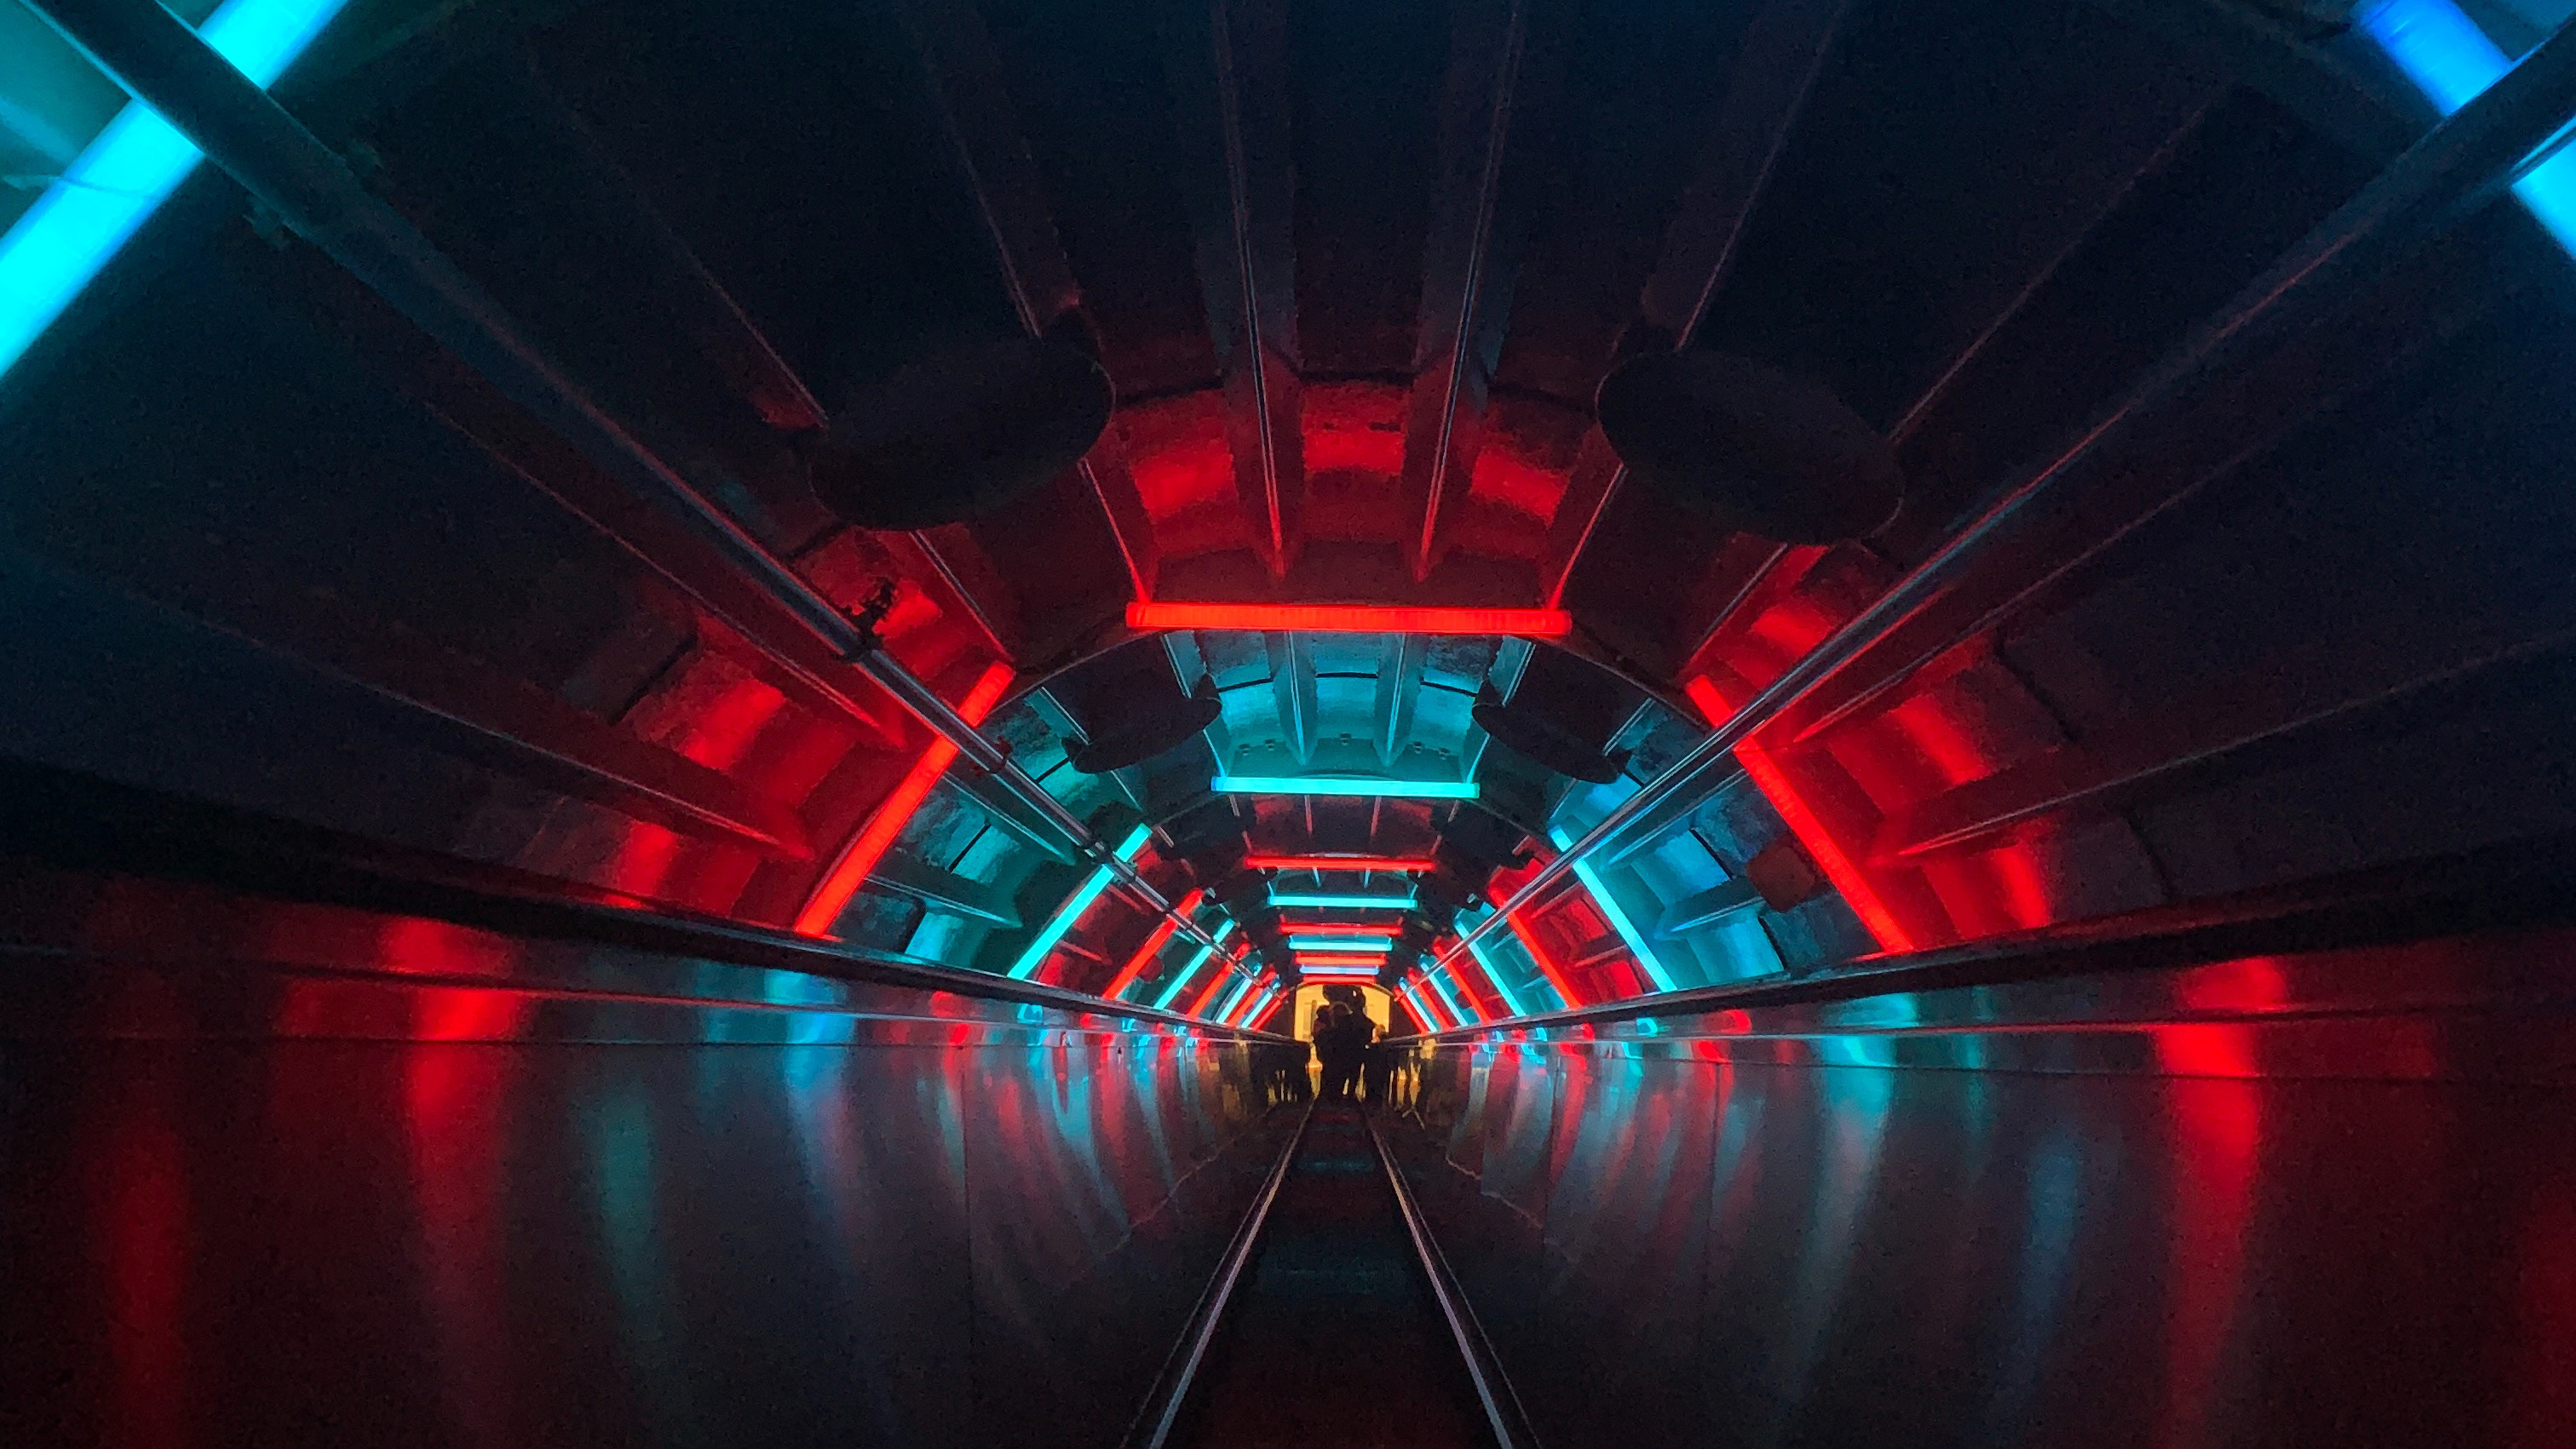 Escalator tunnel dark neon hd photography k wallpapers images backgrounds photos and pictures